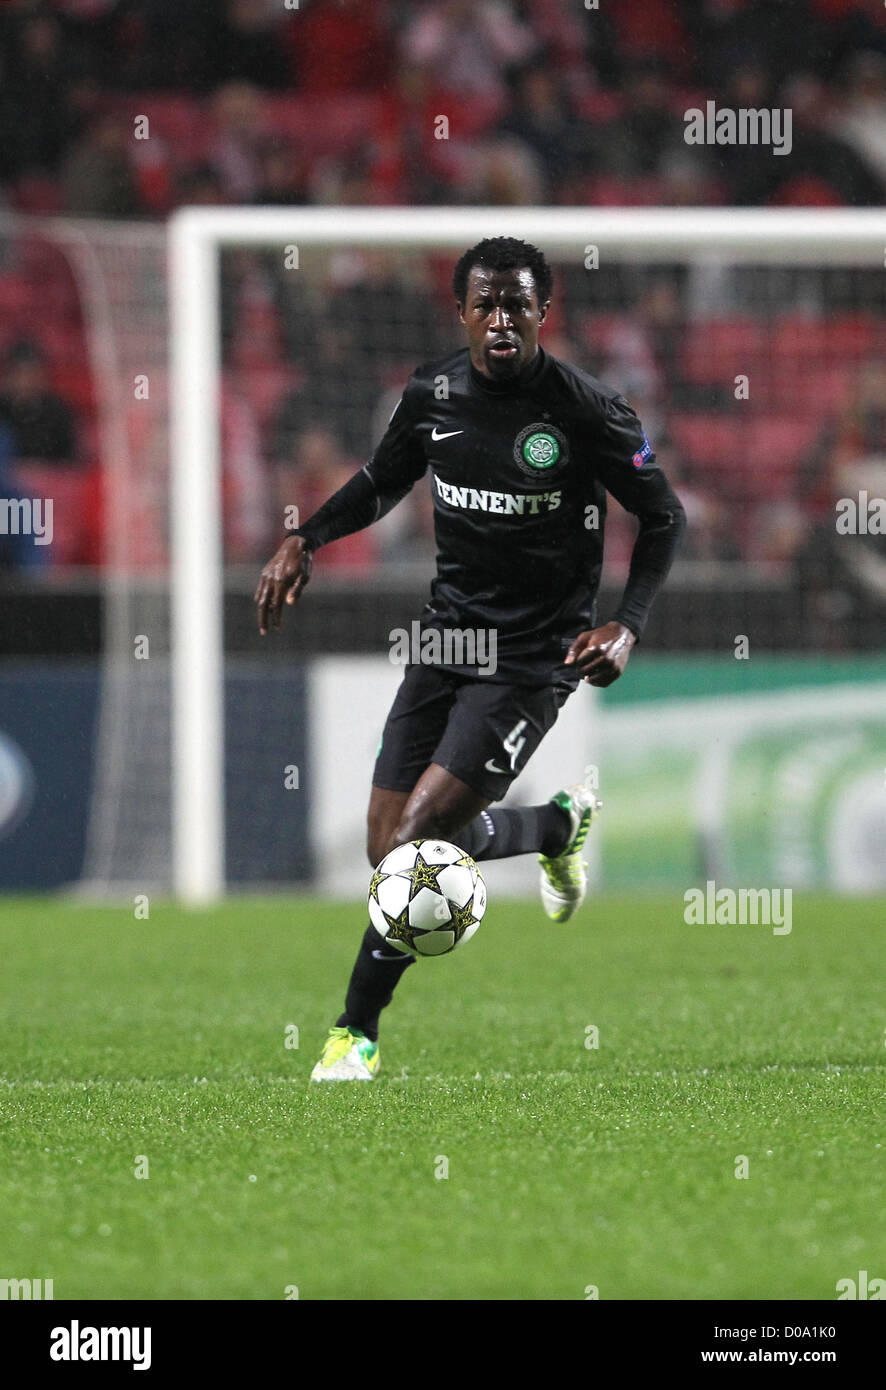 Lisbon, Portugal. 20th November 2012. Celtic'sdefender Efe Ambrose during the group G UEFA Champions League  football match between Benfica and Celtic at Luz Stadium in Lisbon on November 20, 2012.   Photo / Carlos Rodrigues (Photo credit should read Carlos Rodrigues ). Stock Photo